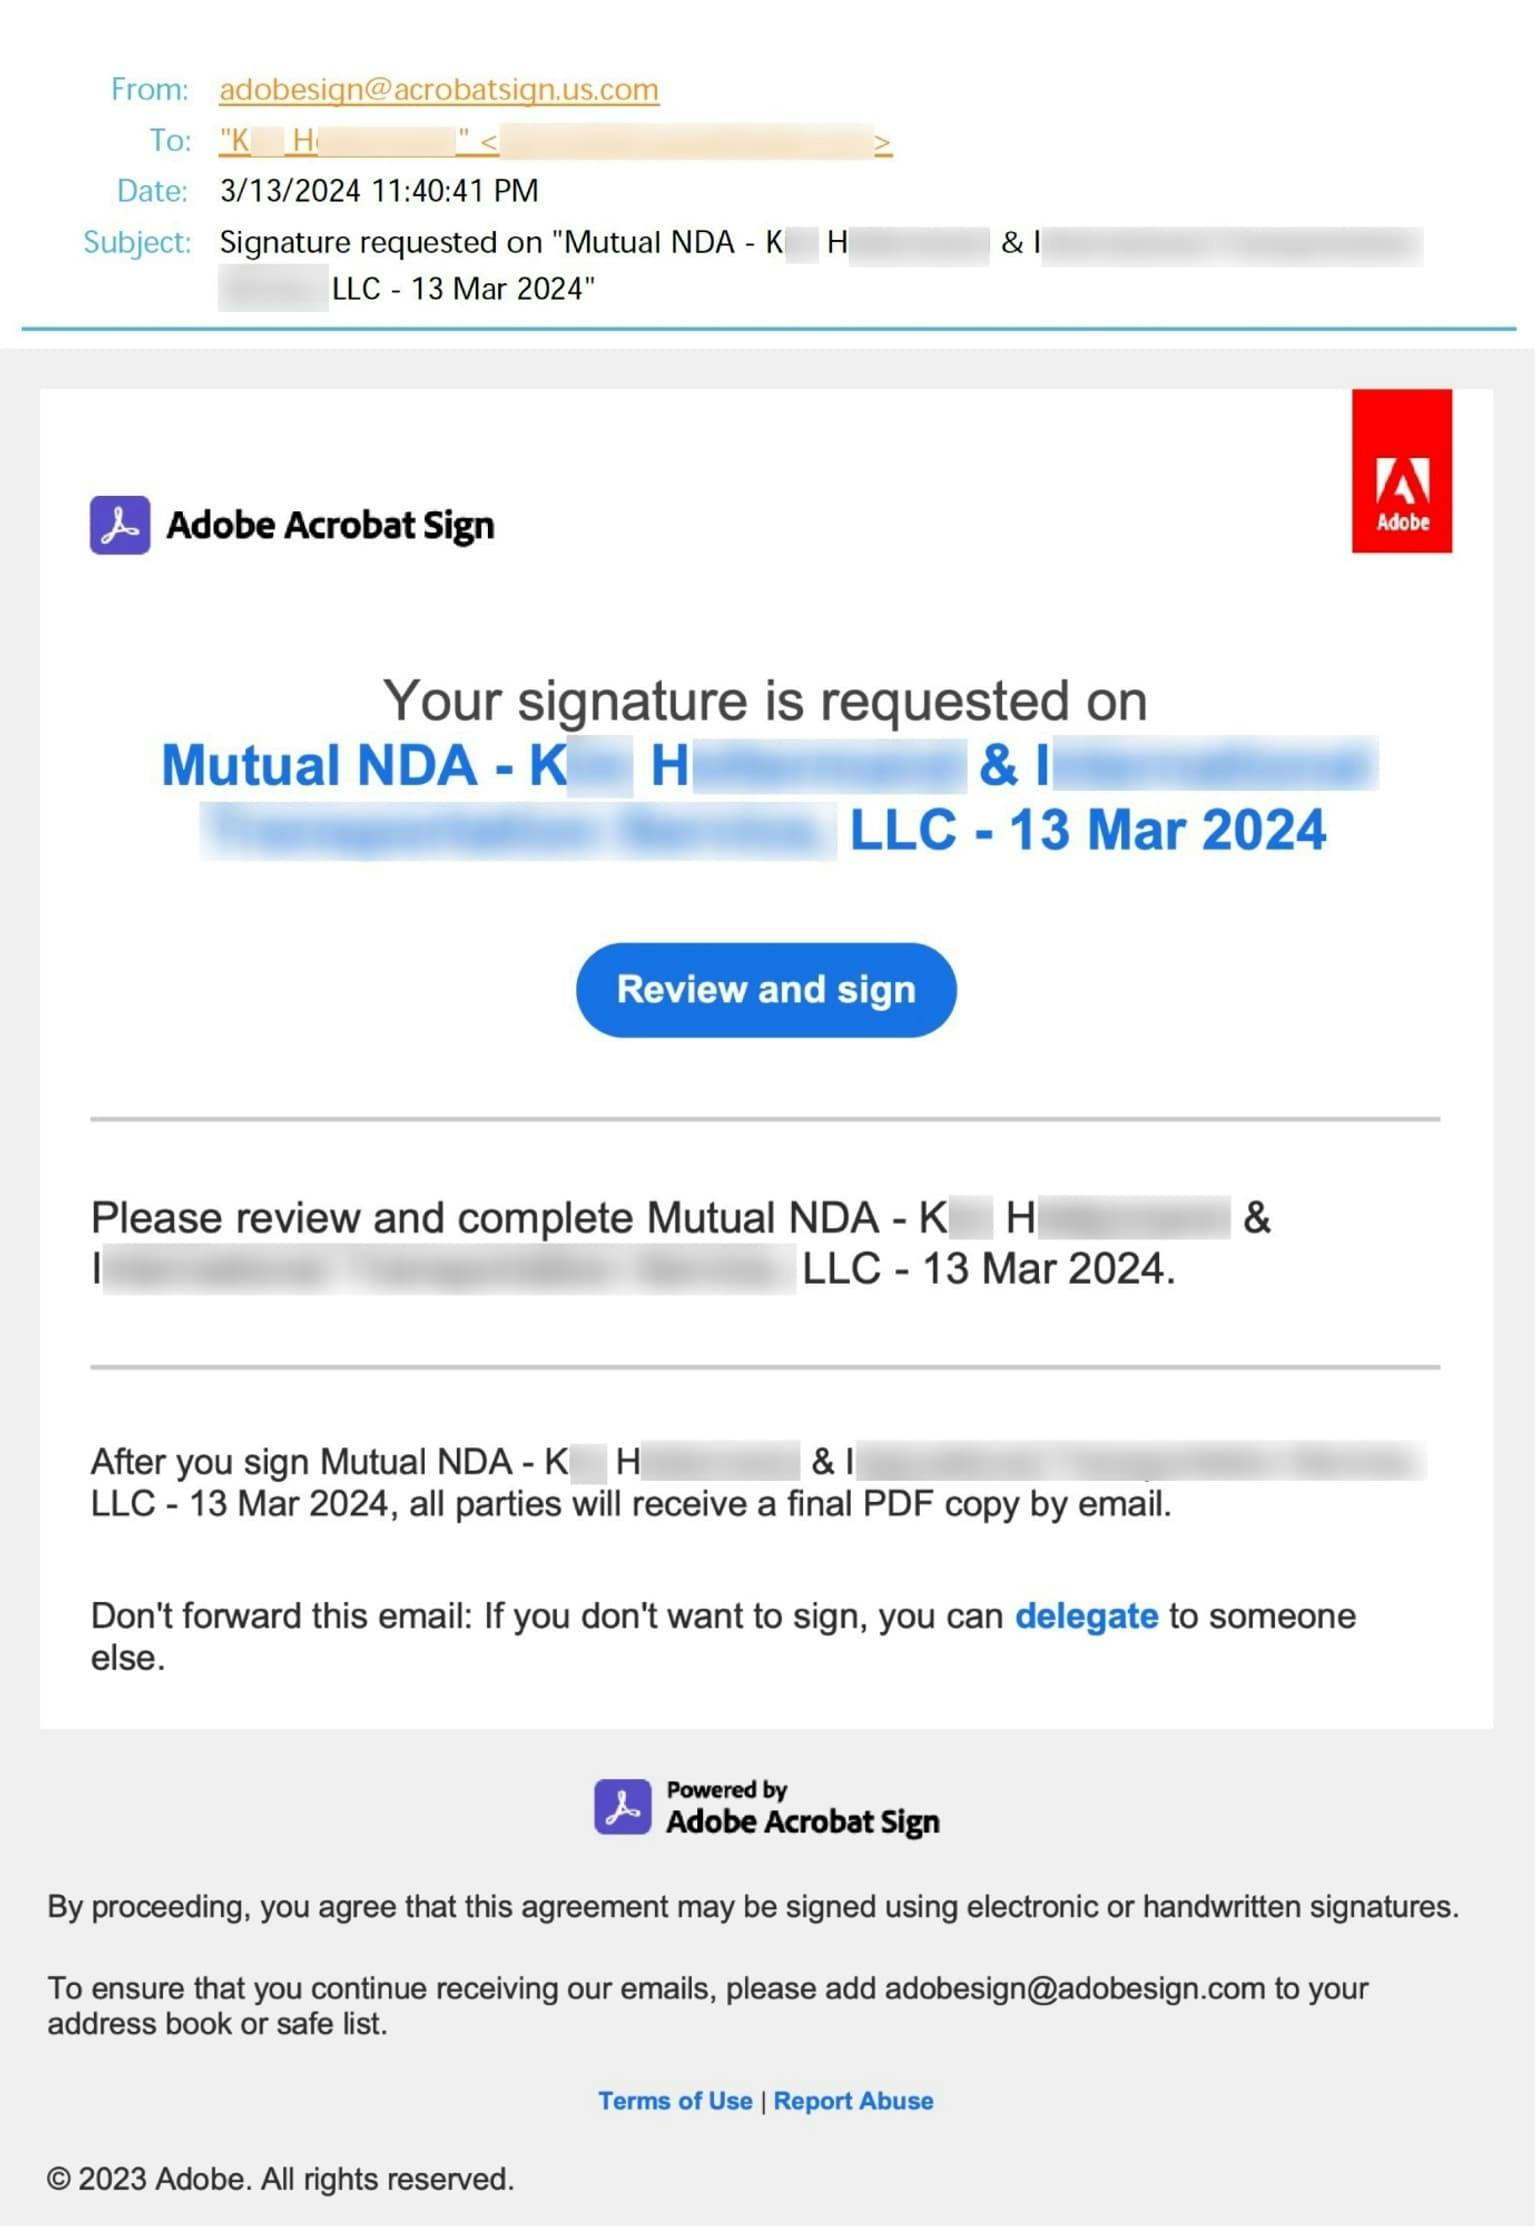 Adobe Acrobat Sign Impersonation Attack Phishing Email